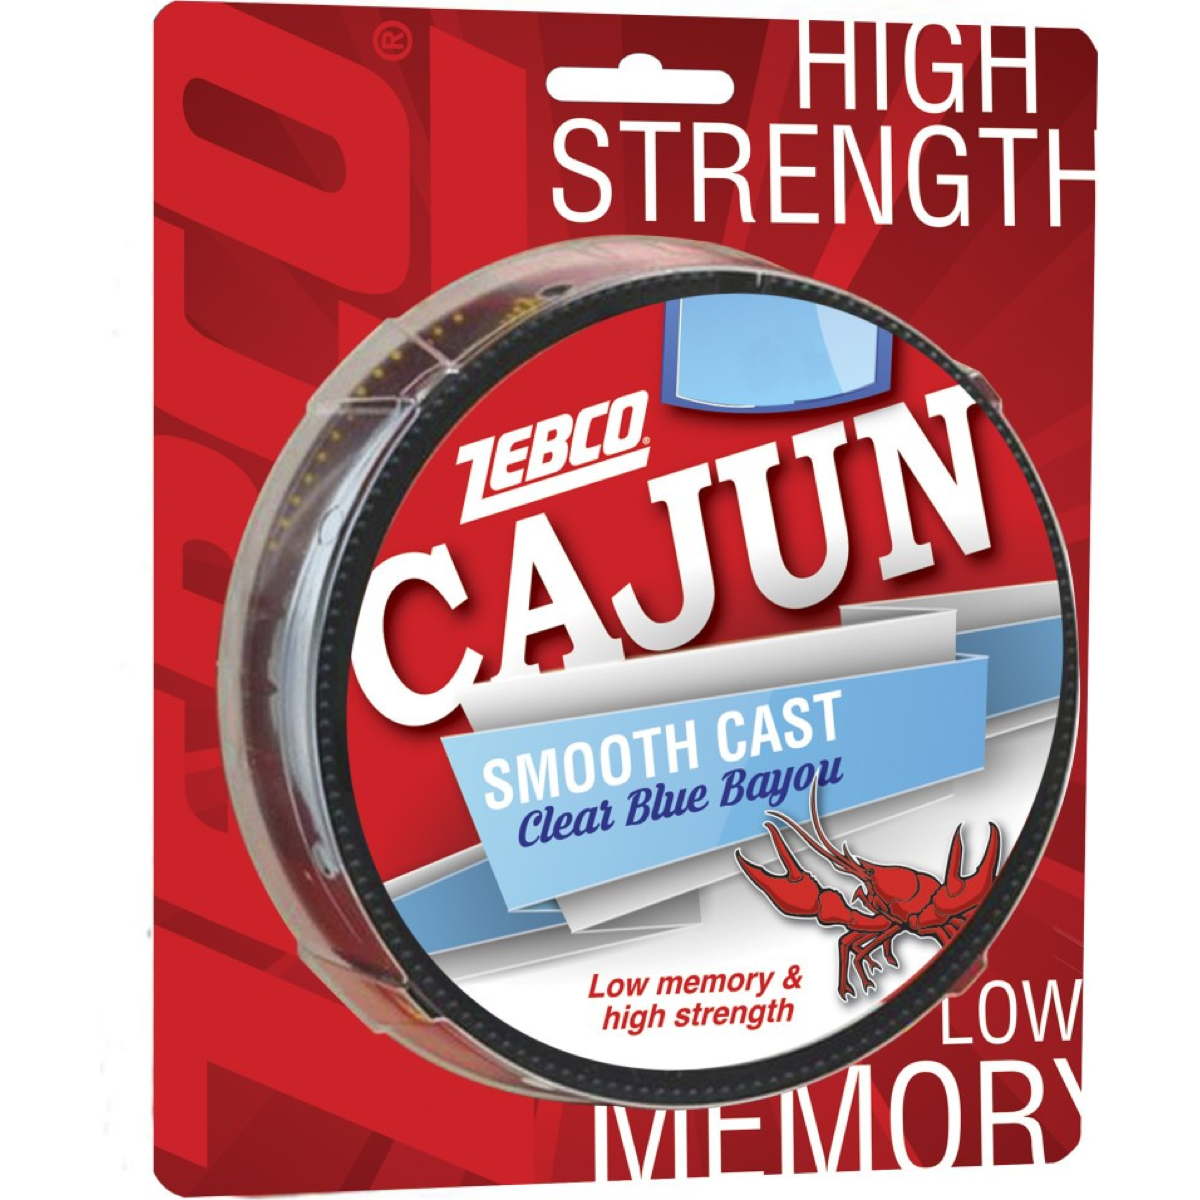 Photo of Cajun Smooth Cast Line for sale at United Tackle Shops.